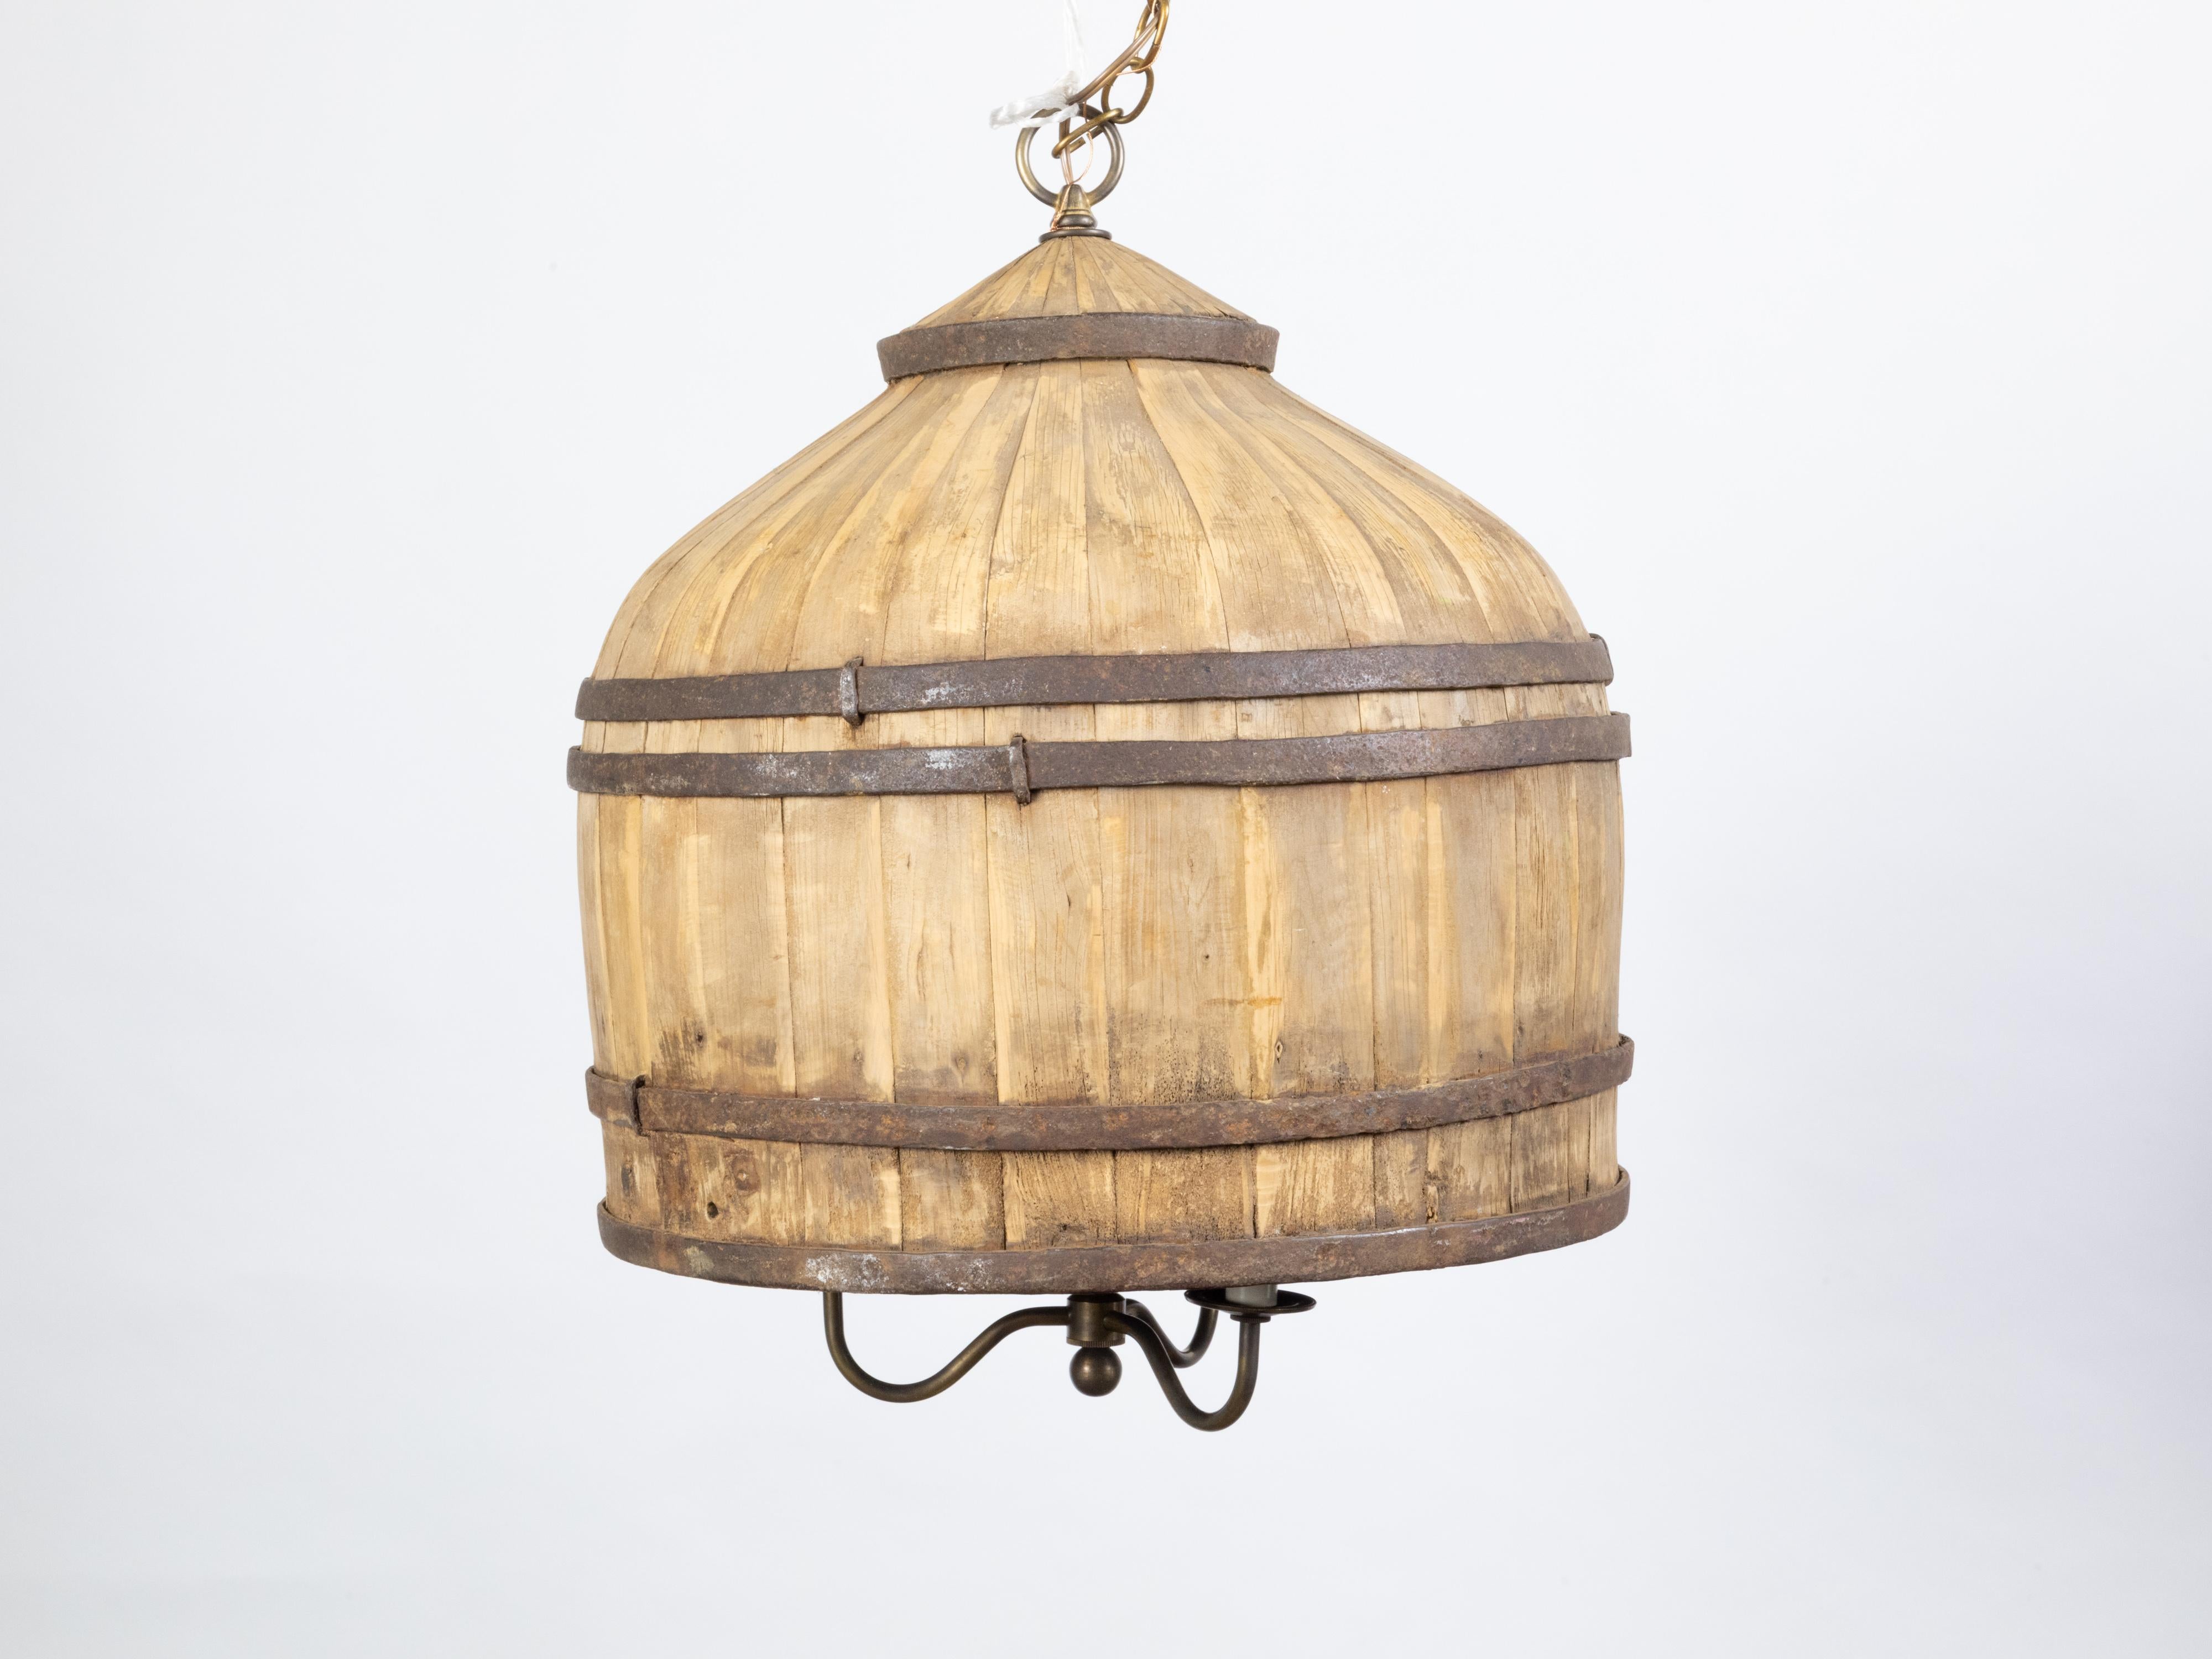 An English vintage wooden barrel light fixture from the mid 20th century, with three arms. Created in England during the midcentury period, this rustic light fixture features a wooden barrel strengthened with metal braces, securing three scrolling